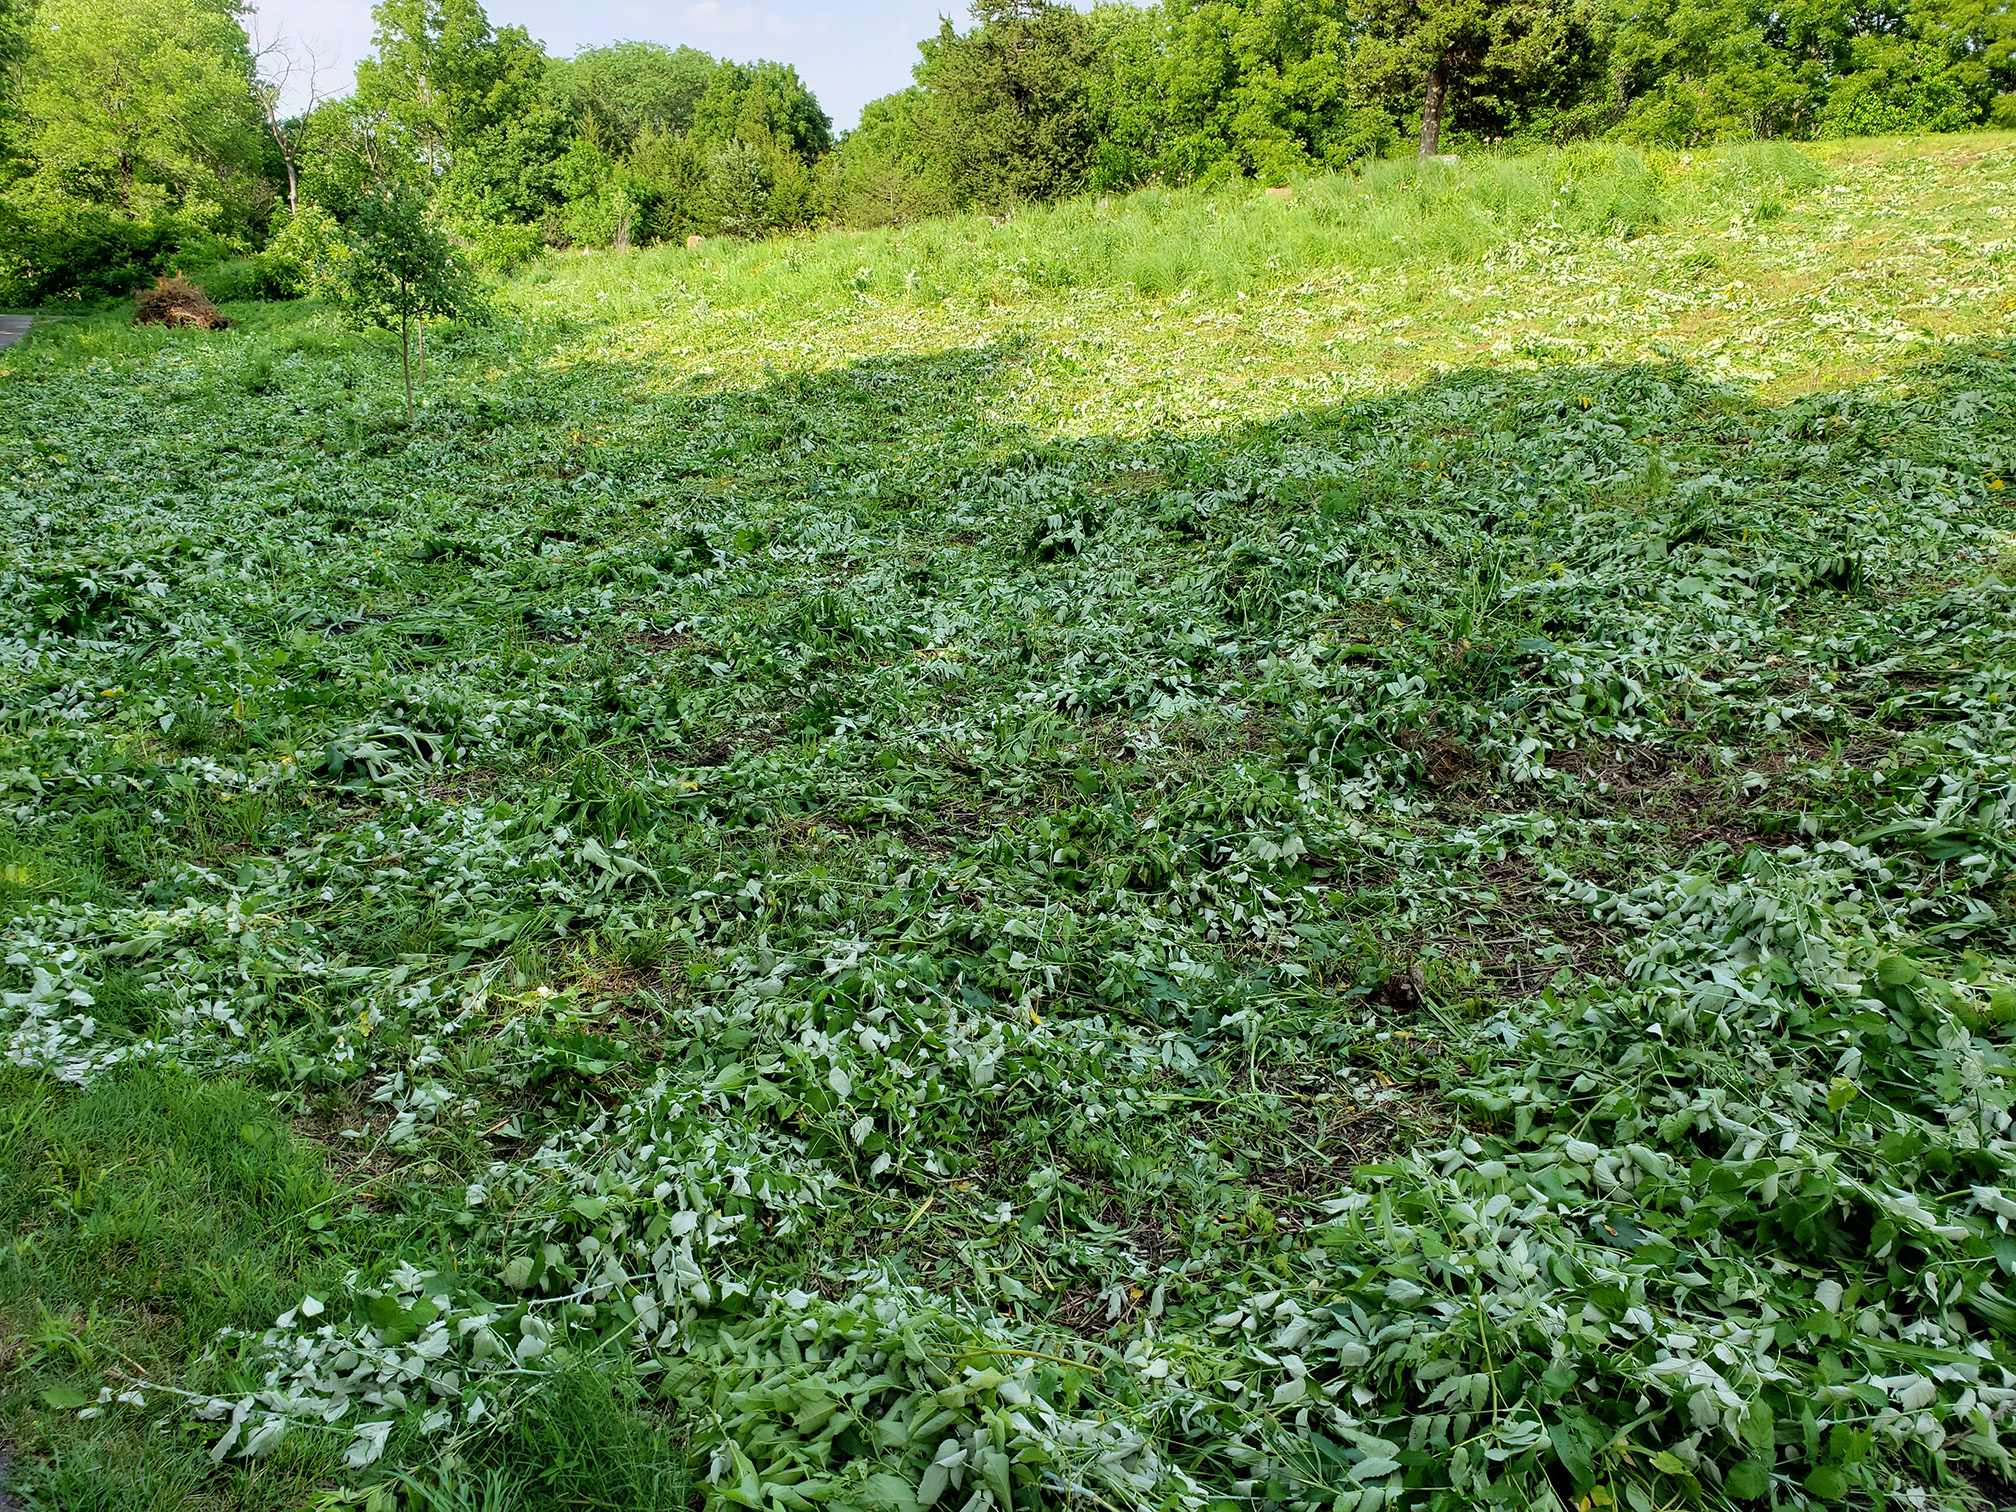 A sloping area of ground on which bushes have been cut down. The cut stems lie scattered across the ground, their fading leaves pale against the freshly growing grass.